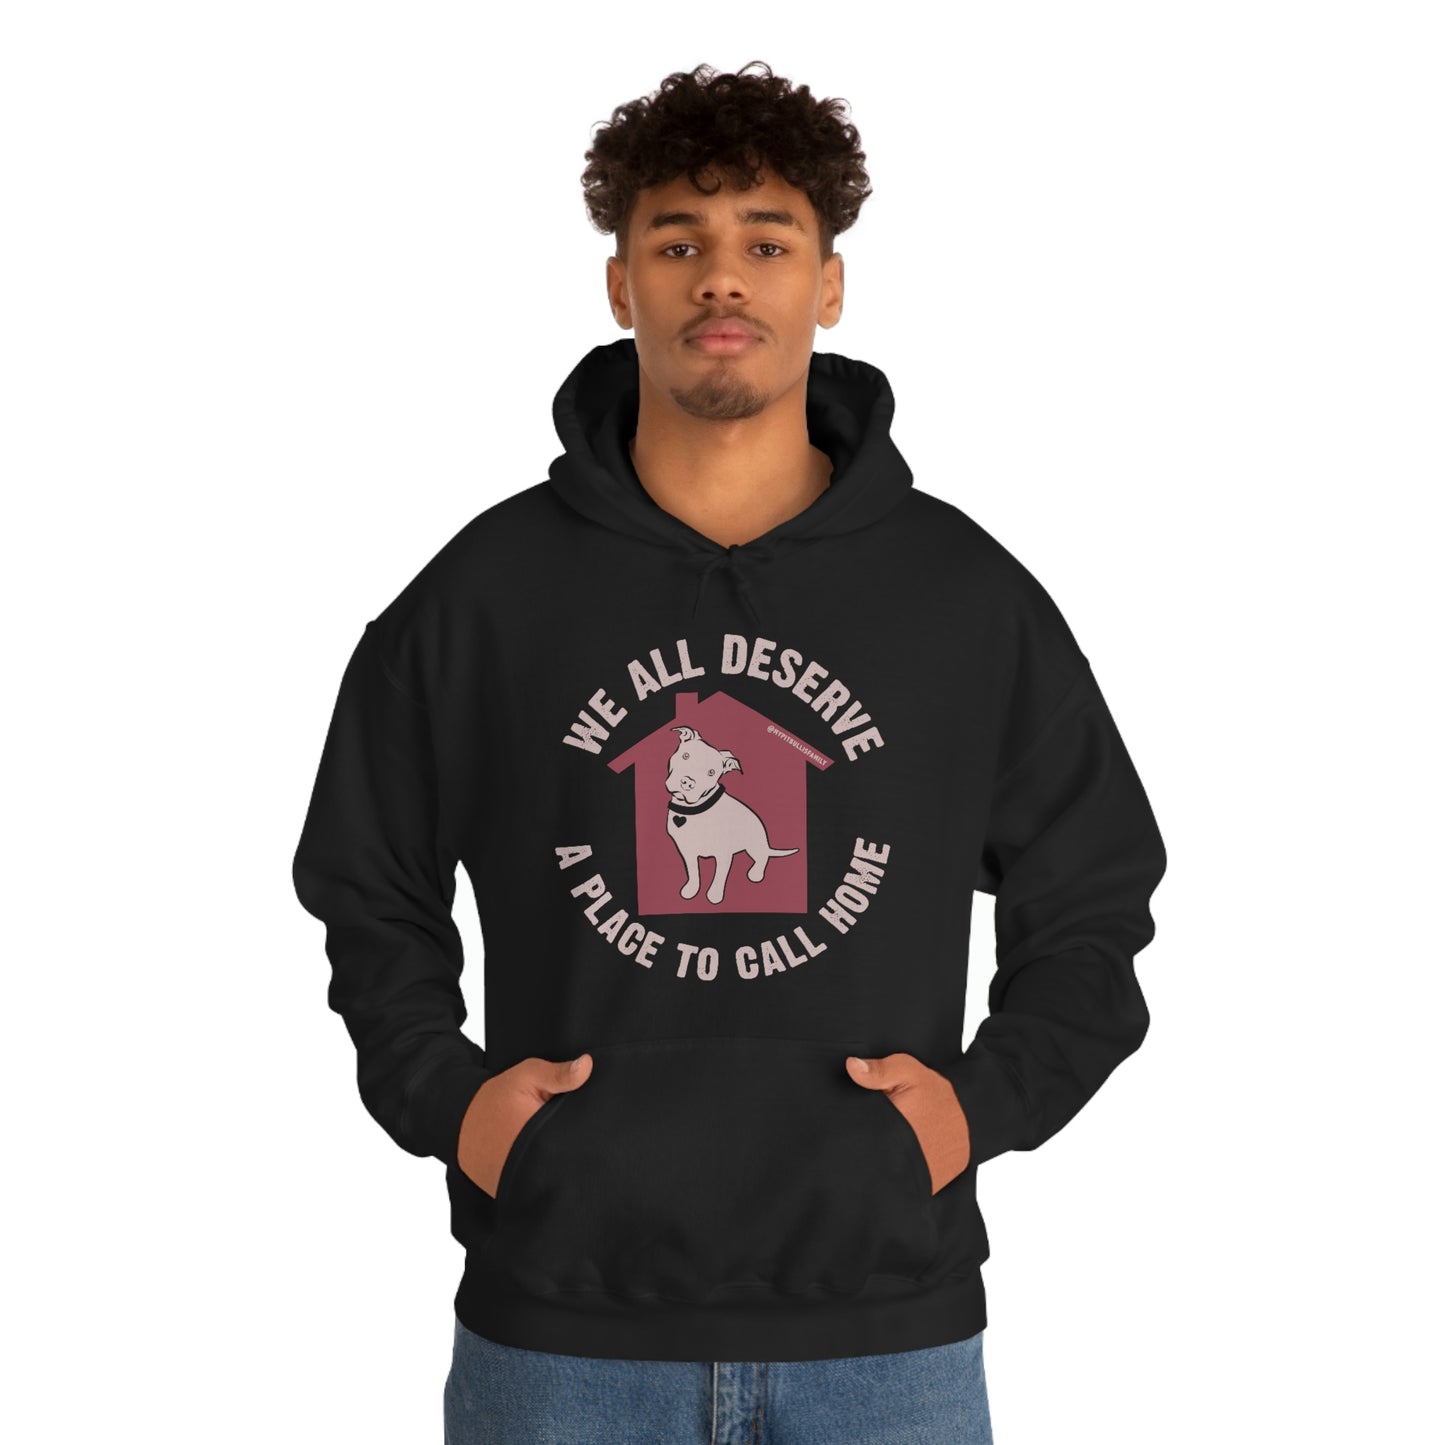 We All Deserve a Place to Call Home Unisex Heavy Blend™ Hooded Sweatshirt